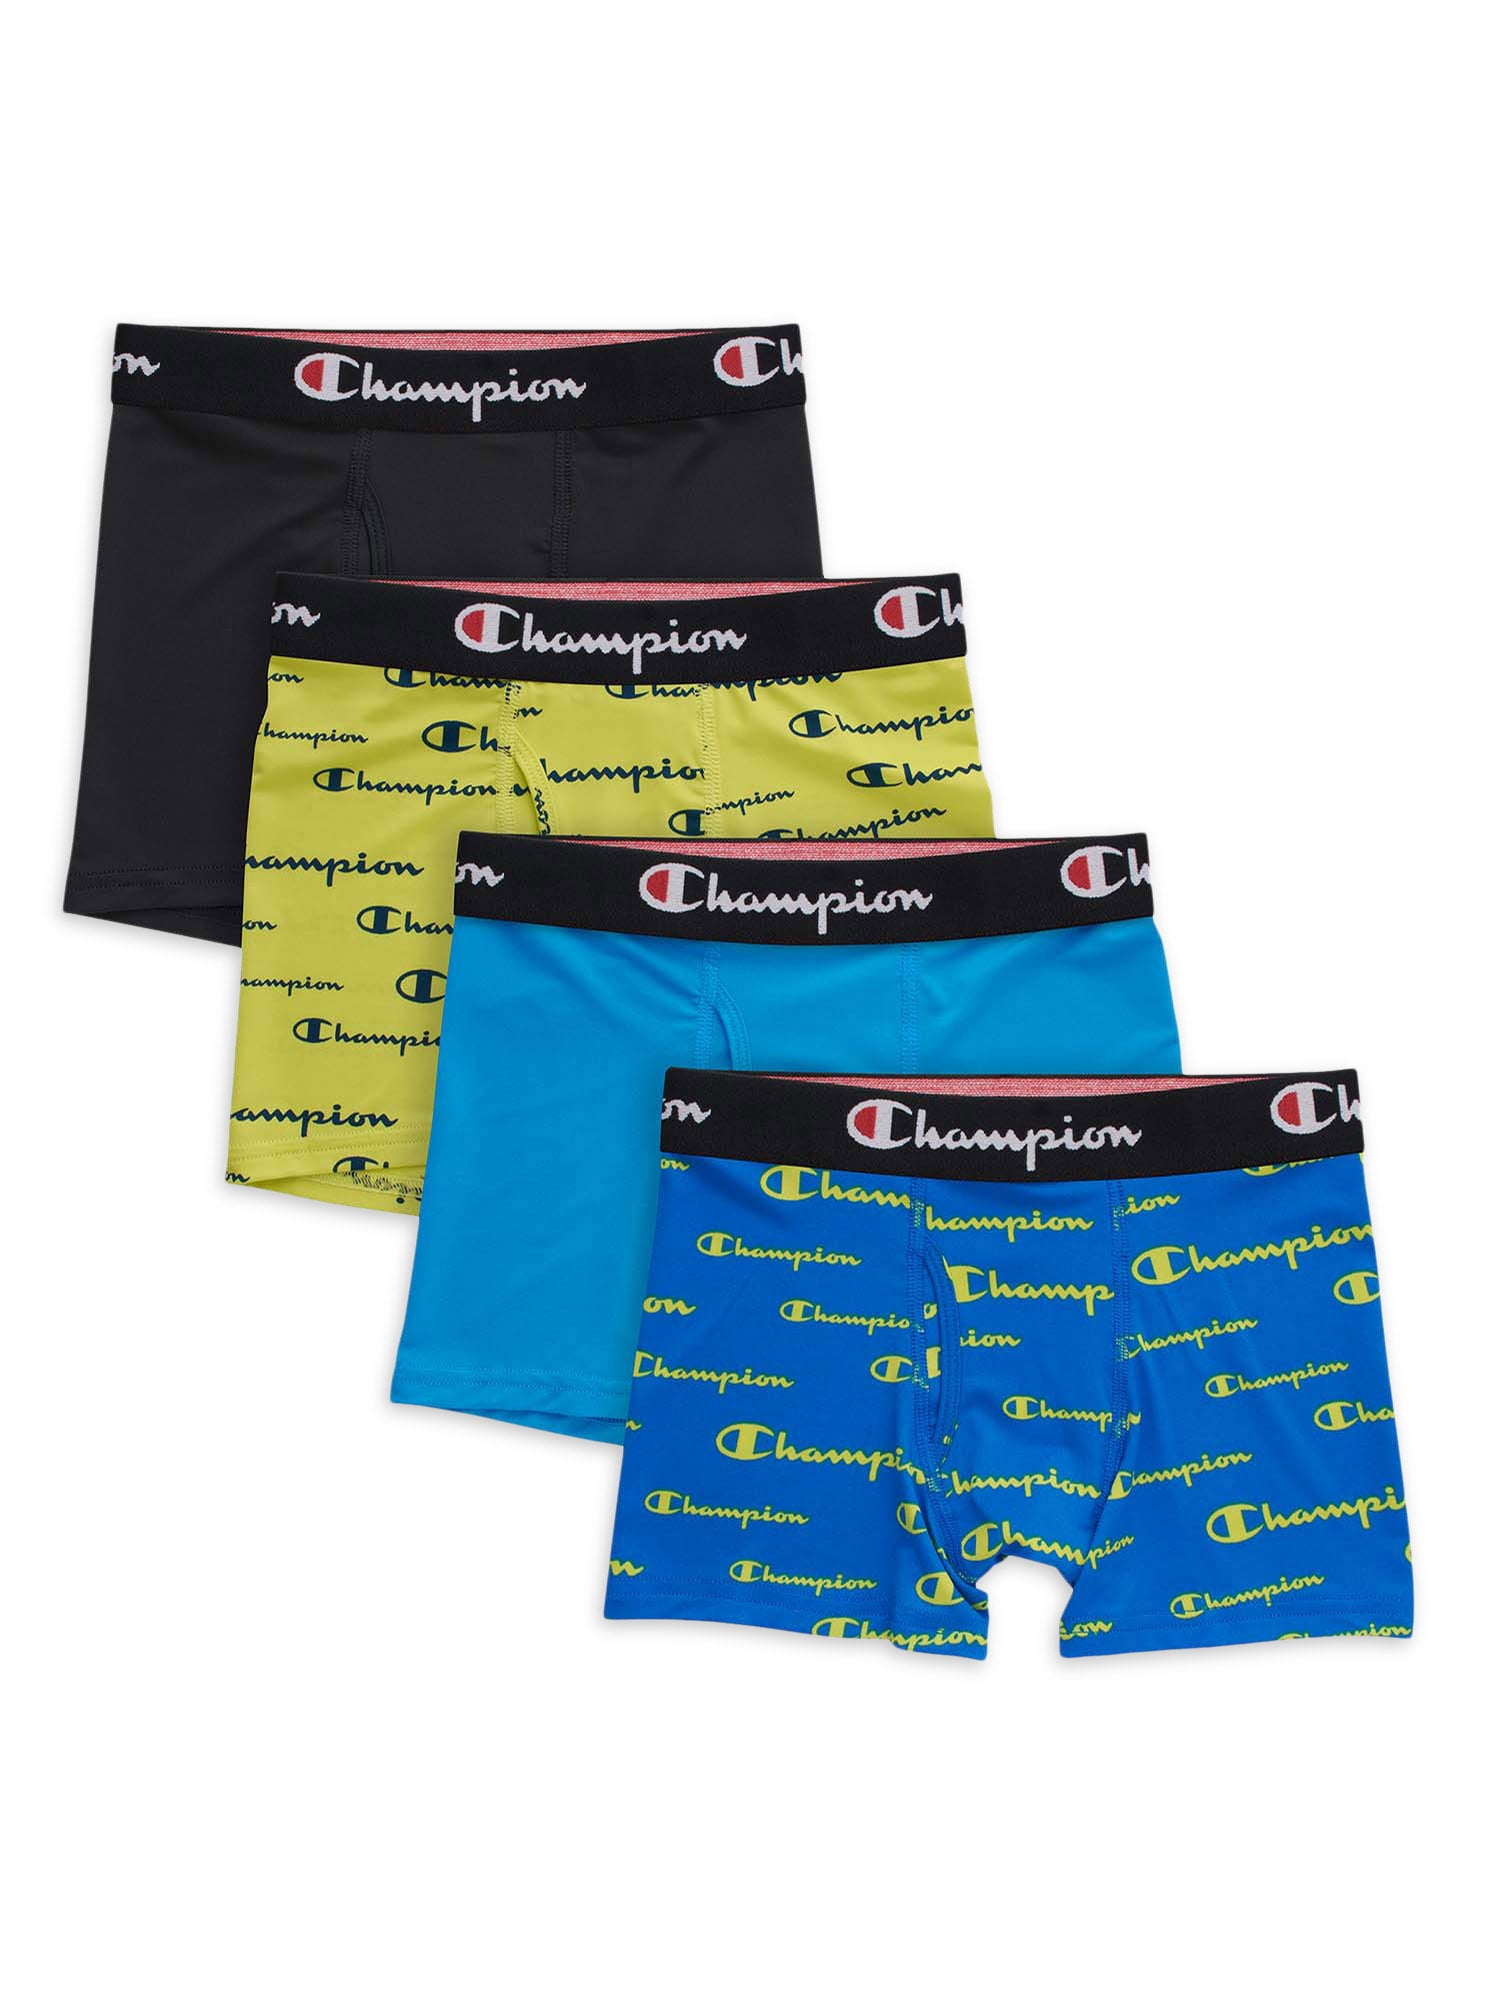 Champion Boys' Everyday Active Stretch Boxer Briefs, 4-Pack, Sizes S-XL 